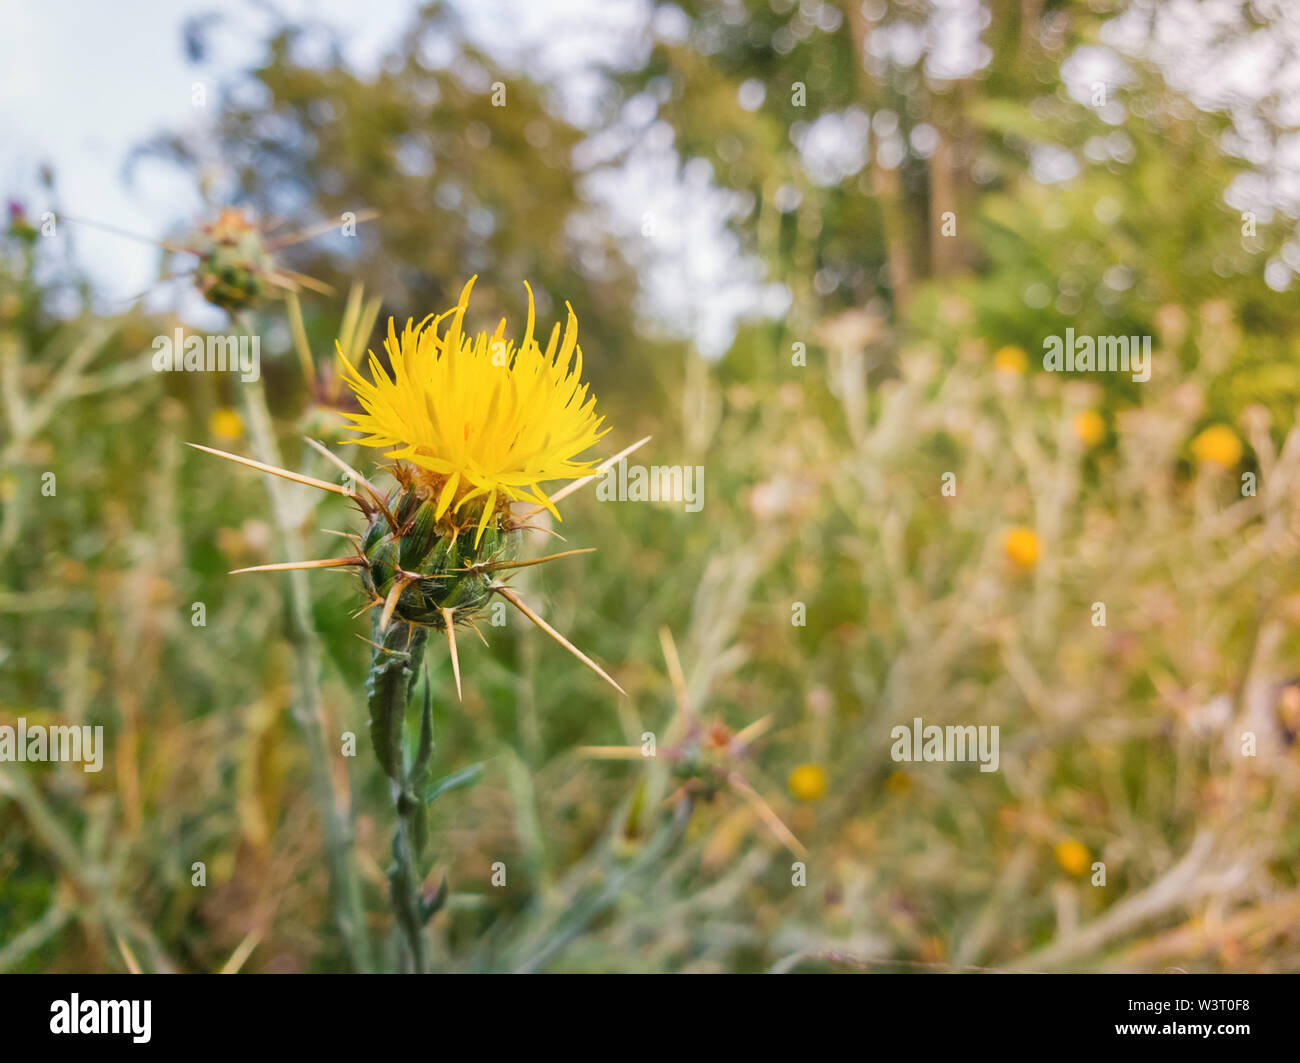 Close up of yellow starthistle spiny bushes growing on a wild steppe field. Centaurea solstitialis invasive plant with flowers and thorns. Stock Photo